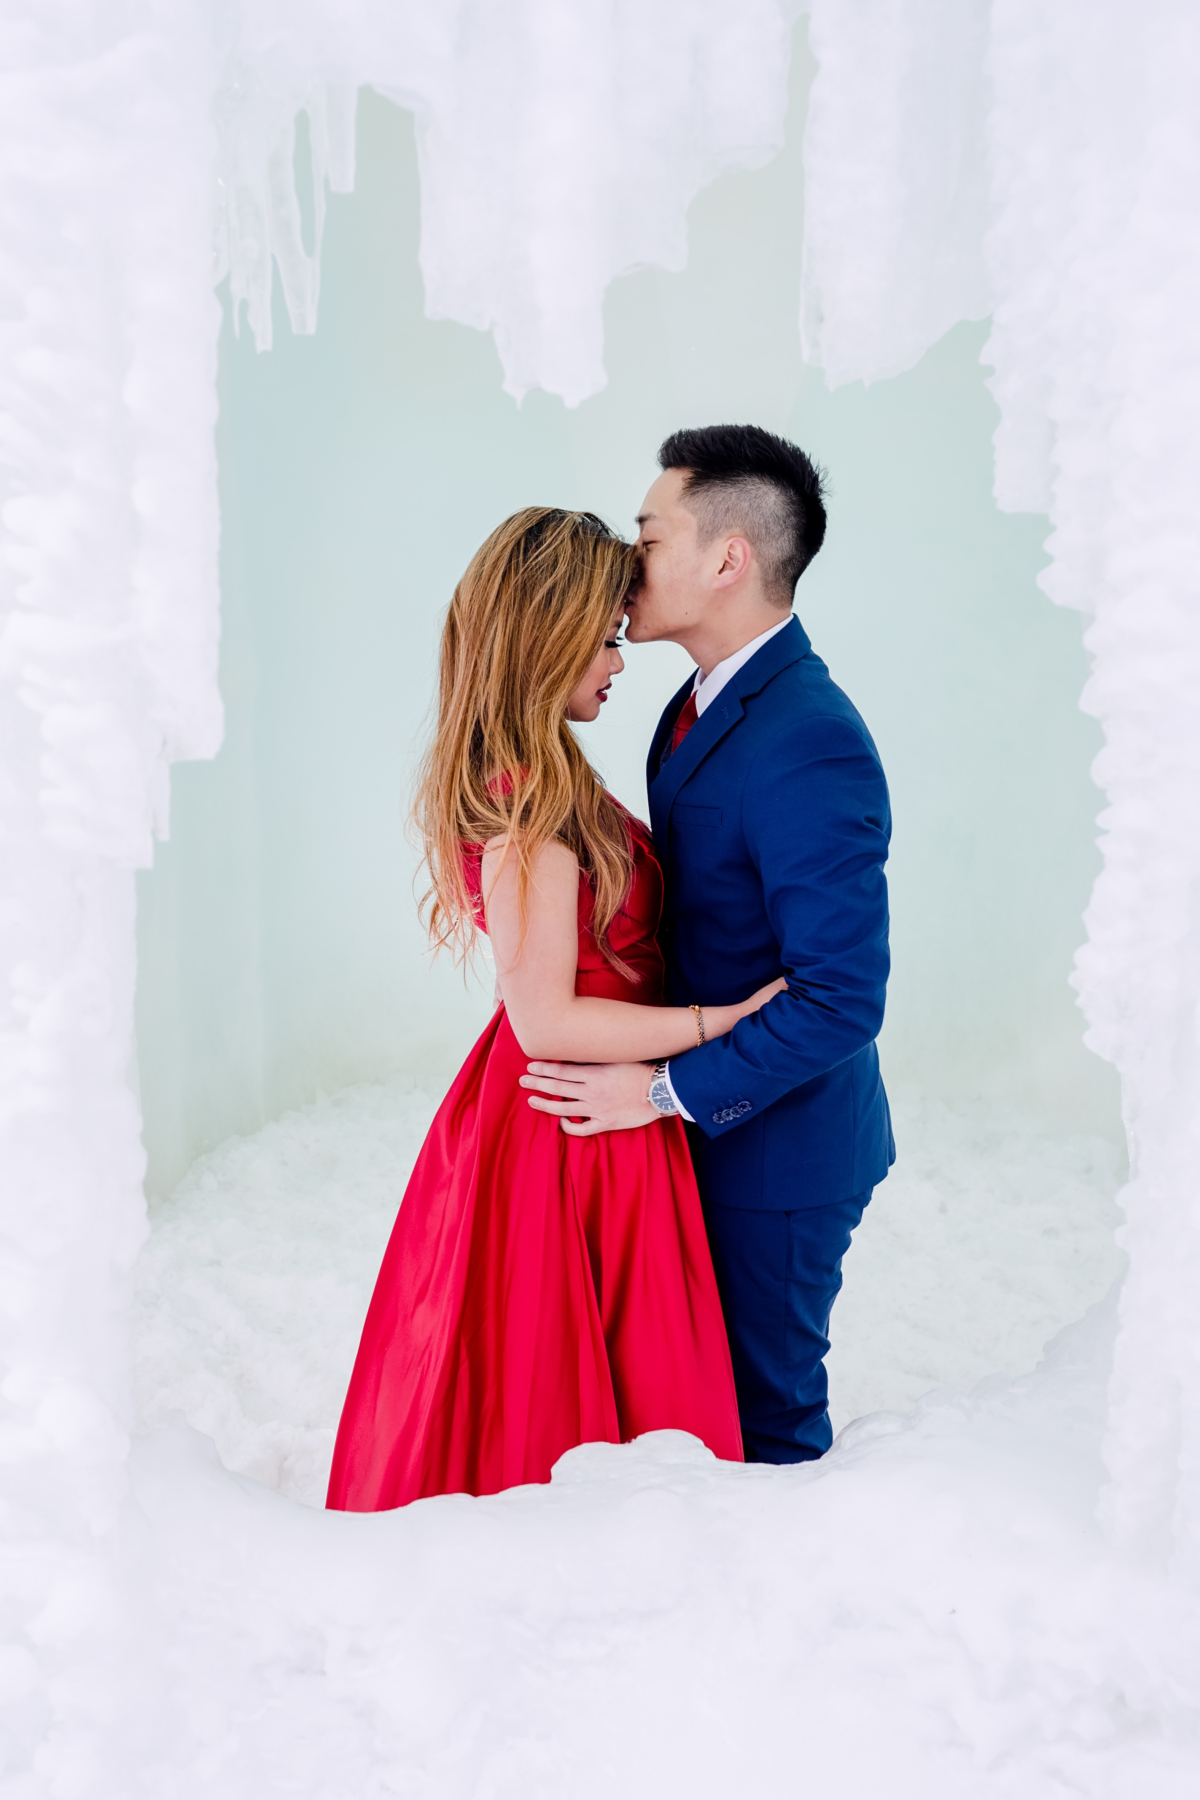 Icy Winter Engagement Photos at Wisconsin Ice Castles